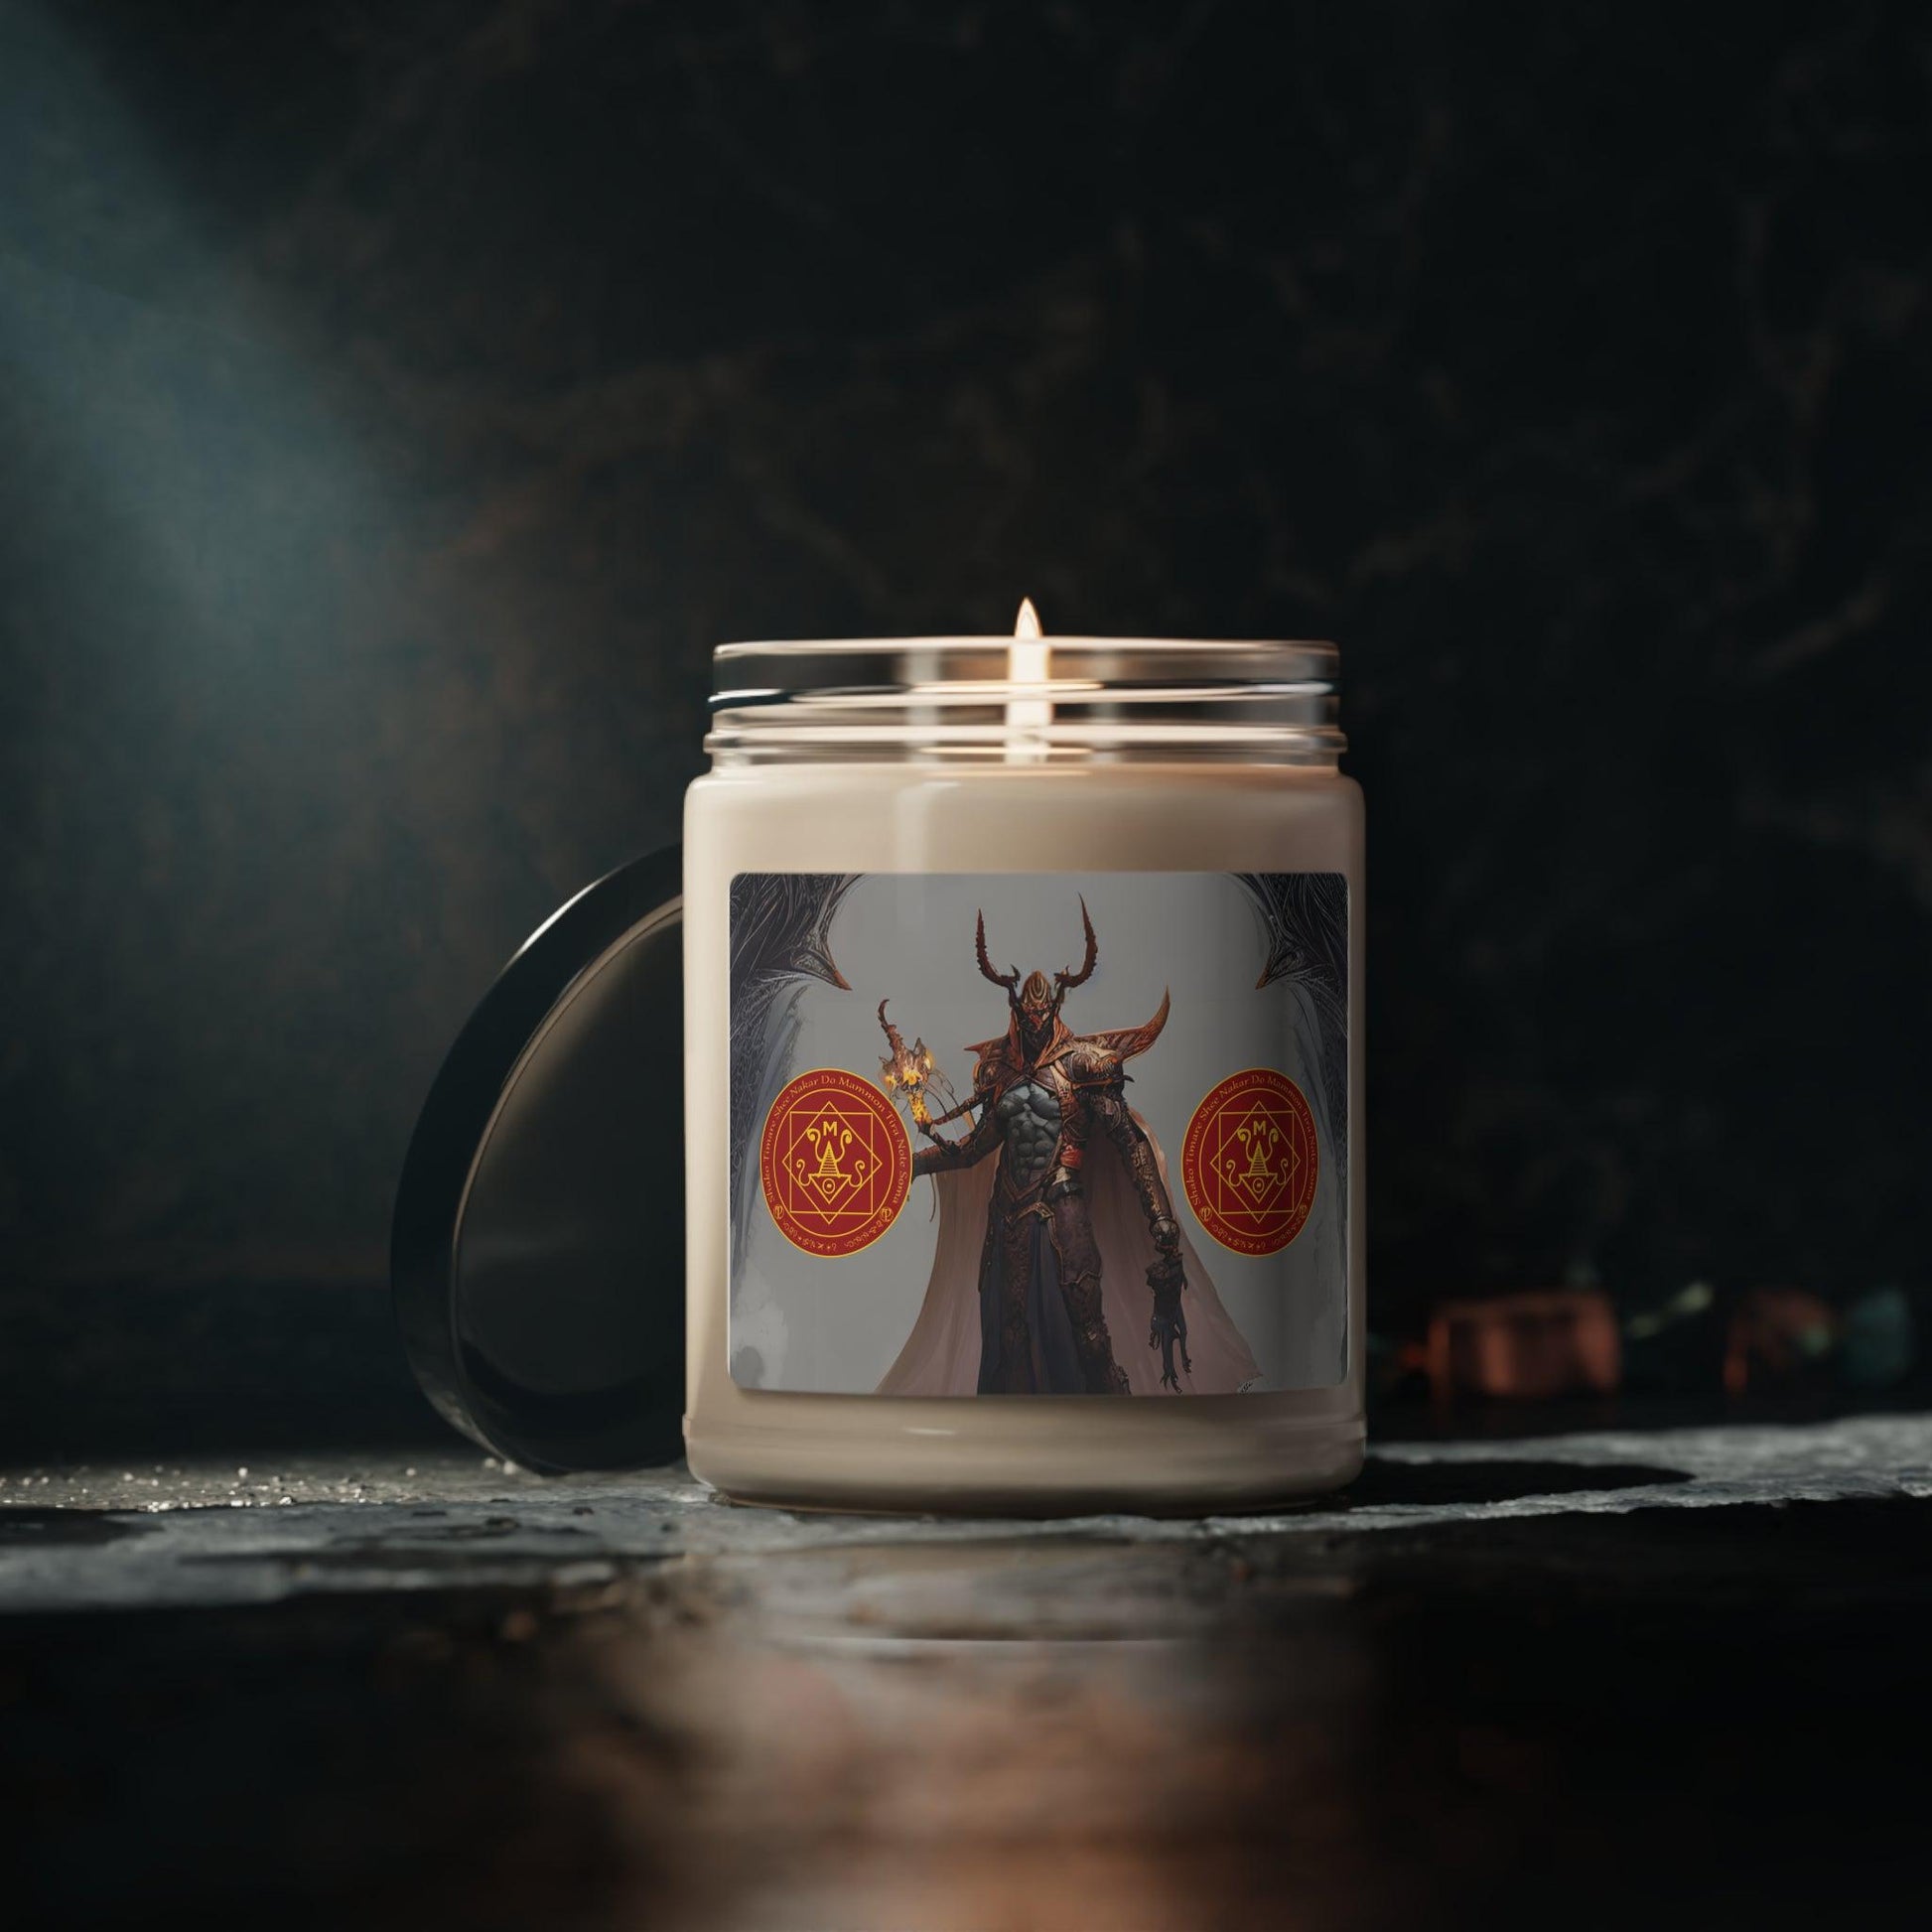 Demon-Mammon-Altar-Scented-Soy-Candle-for-Money-related-offerings-rituals-initiations-or-praying-and-meditation-5